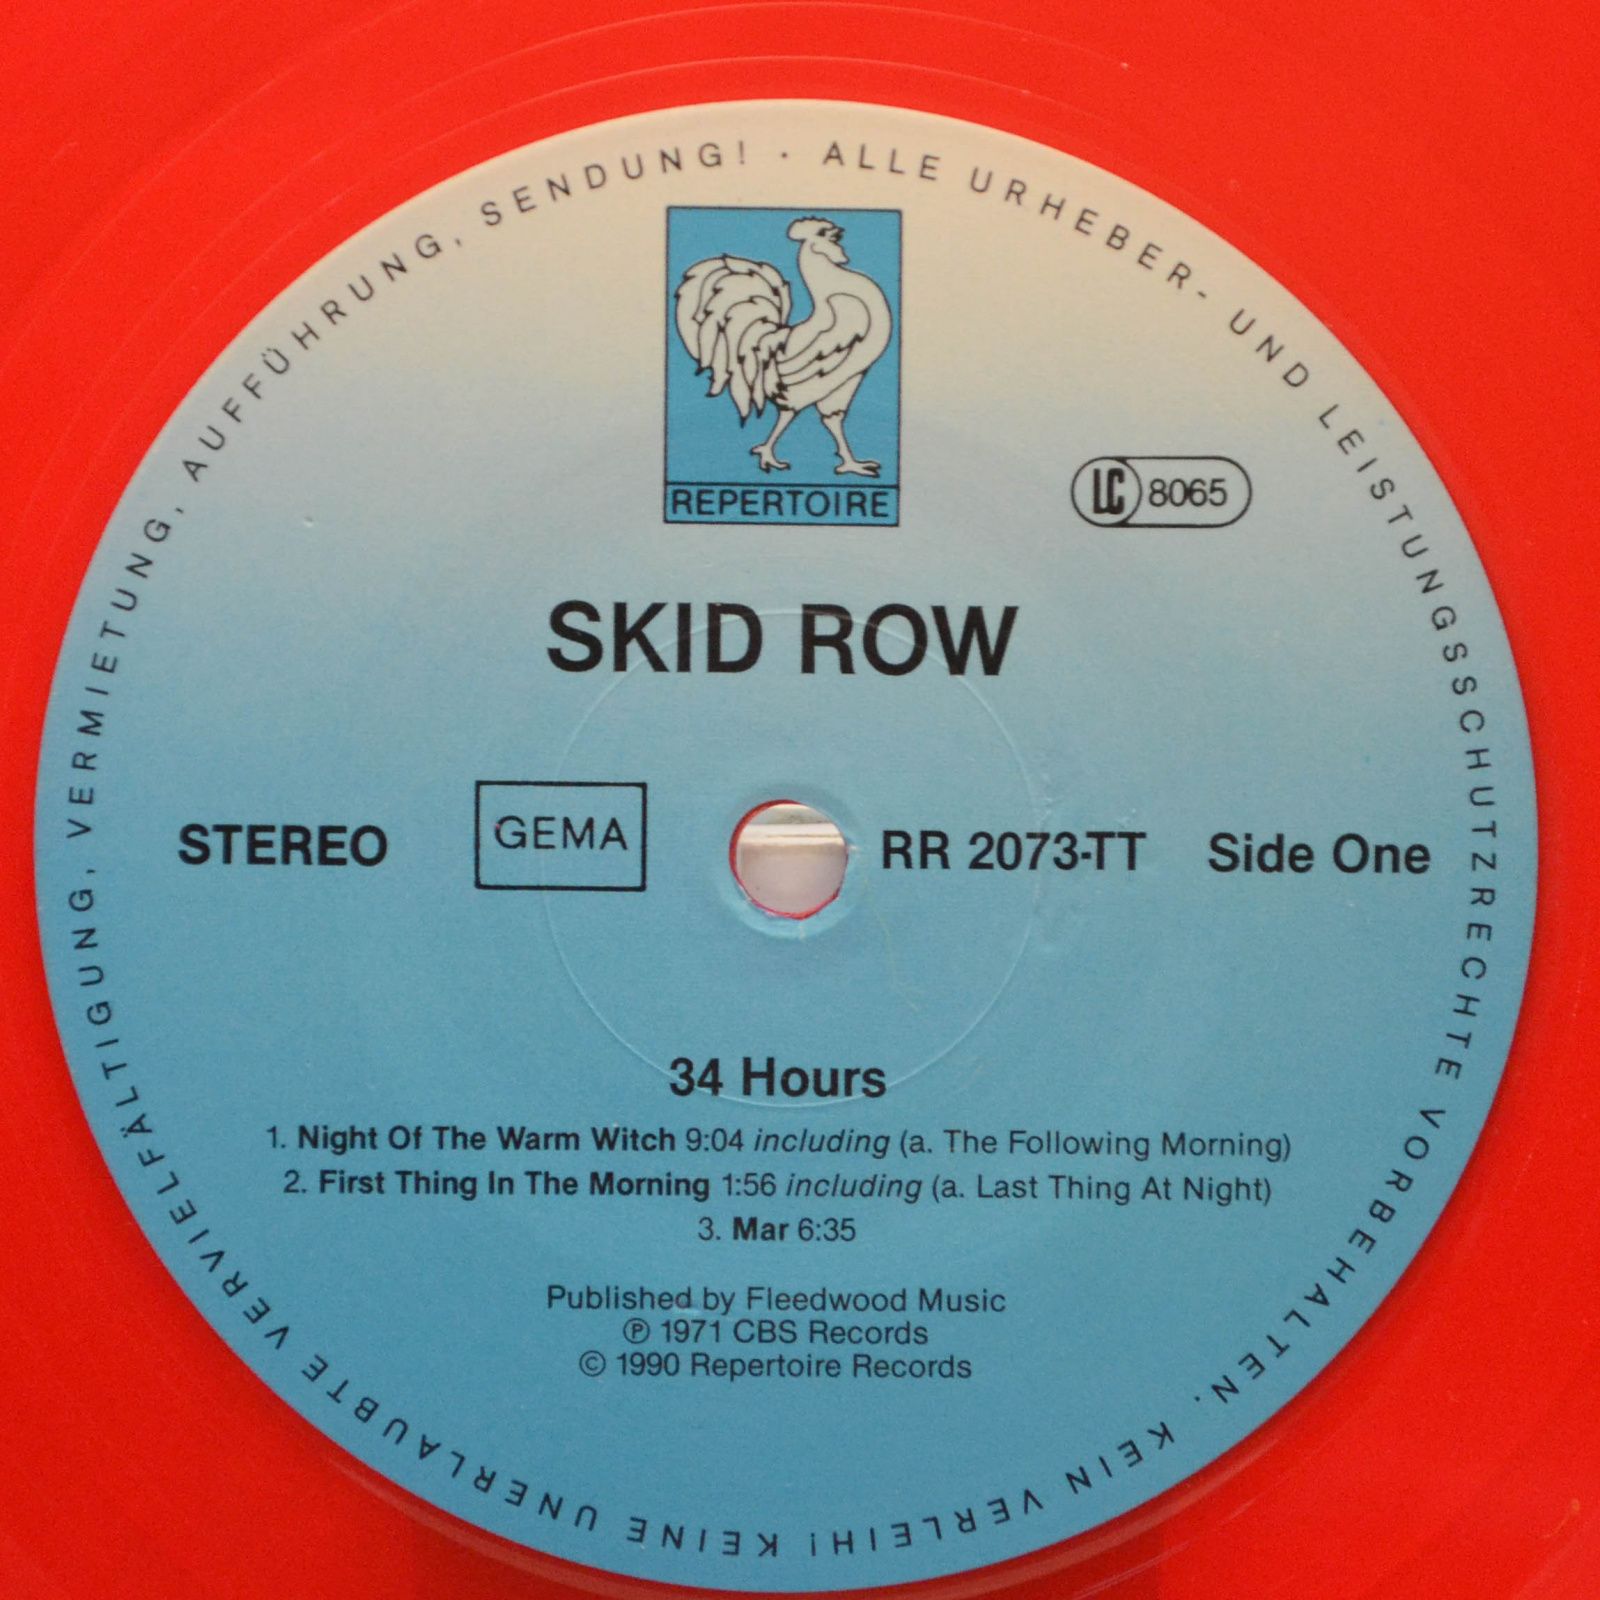 Skid Row (feat. Gary Moore) — 34 Hours, 1990